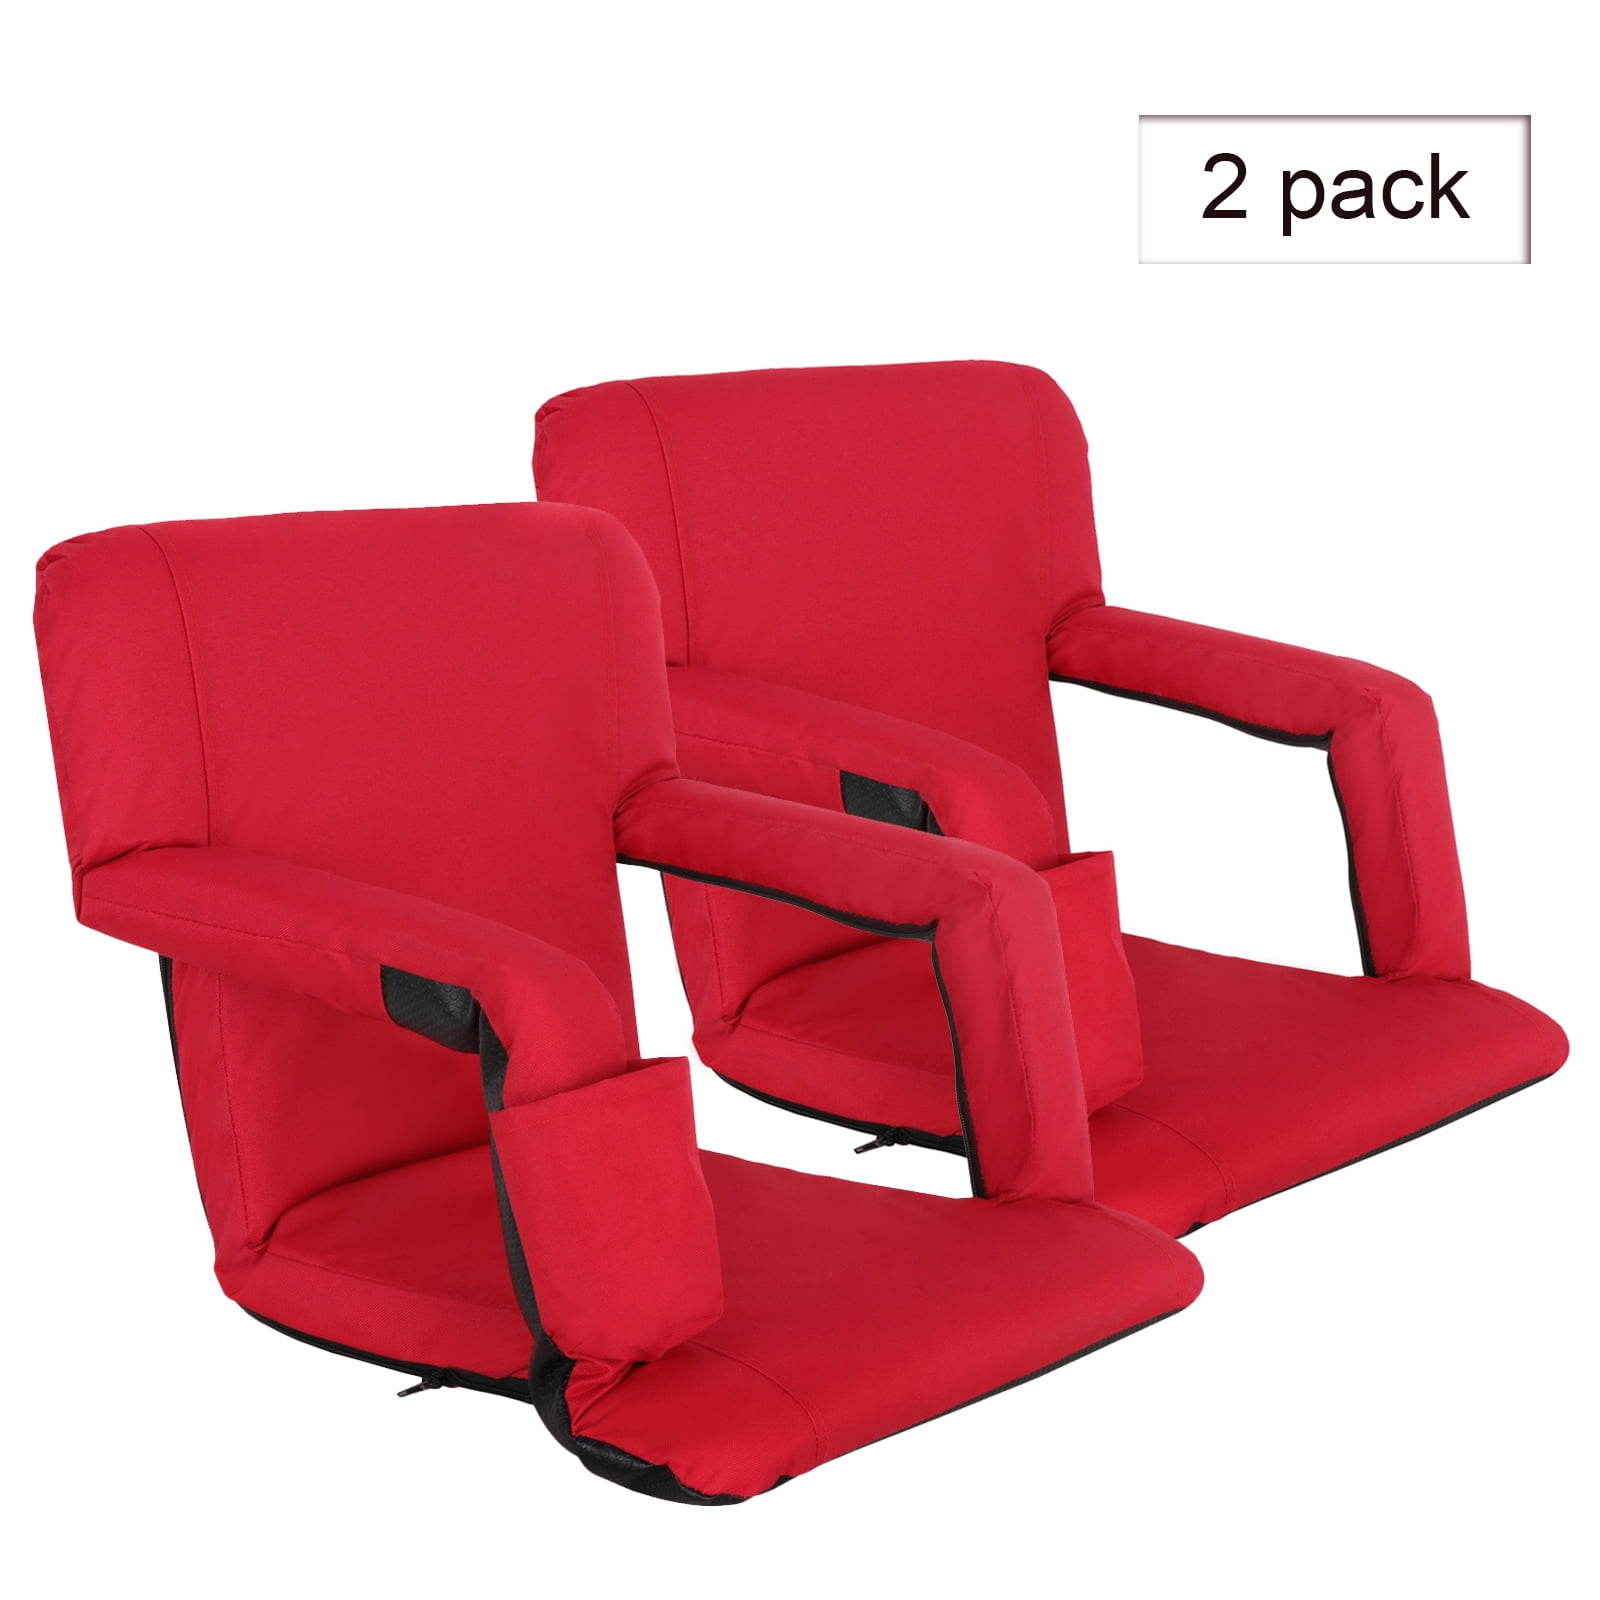 Details about   5 Reclining Positions Stadium Seat Concert Competition Bleacher Chair 5 Angels 